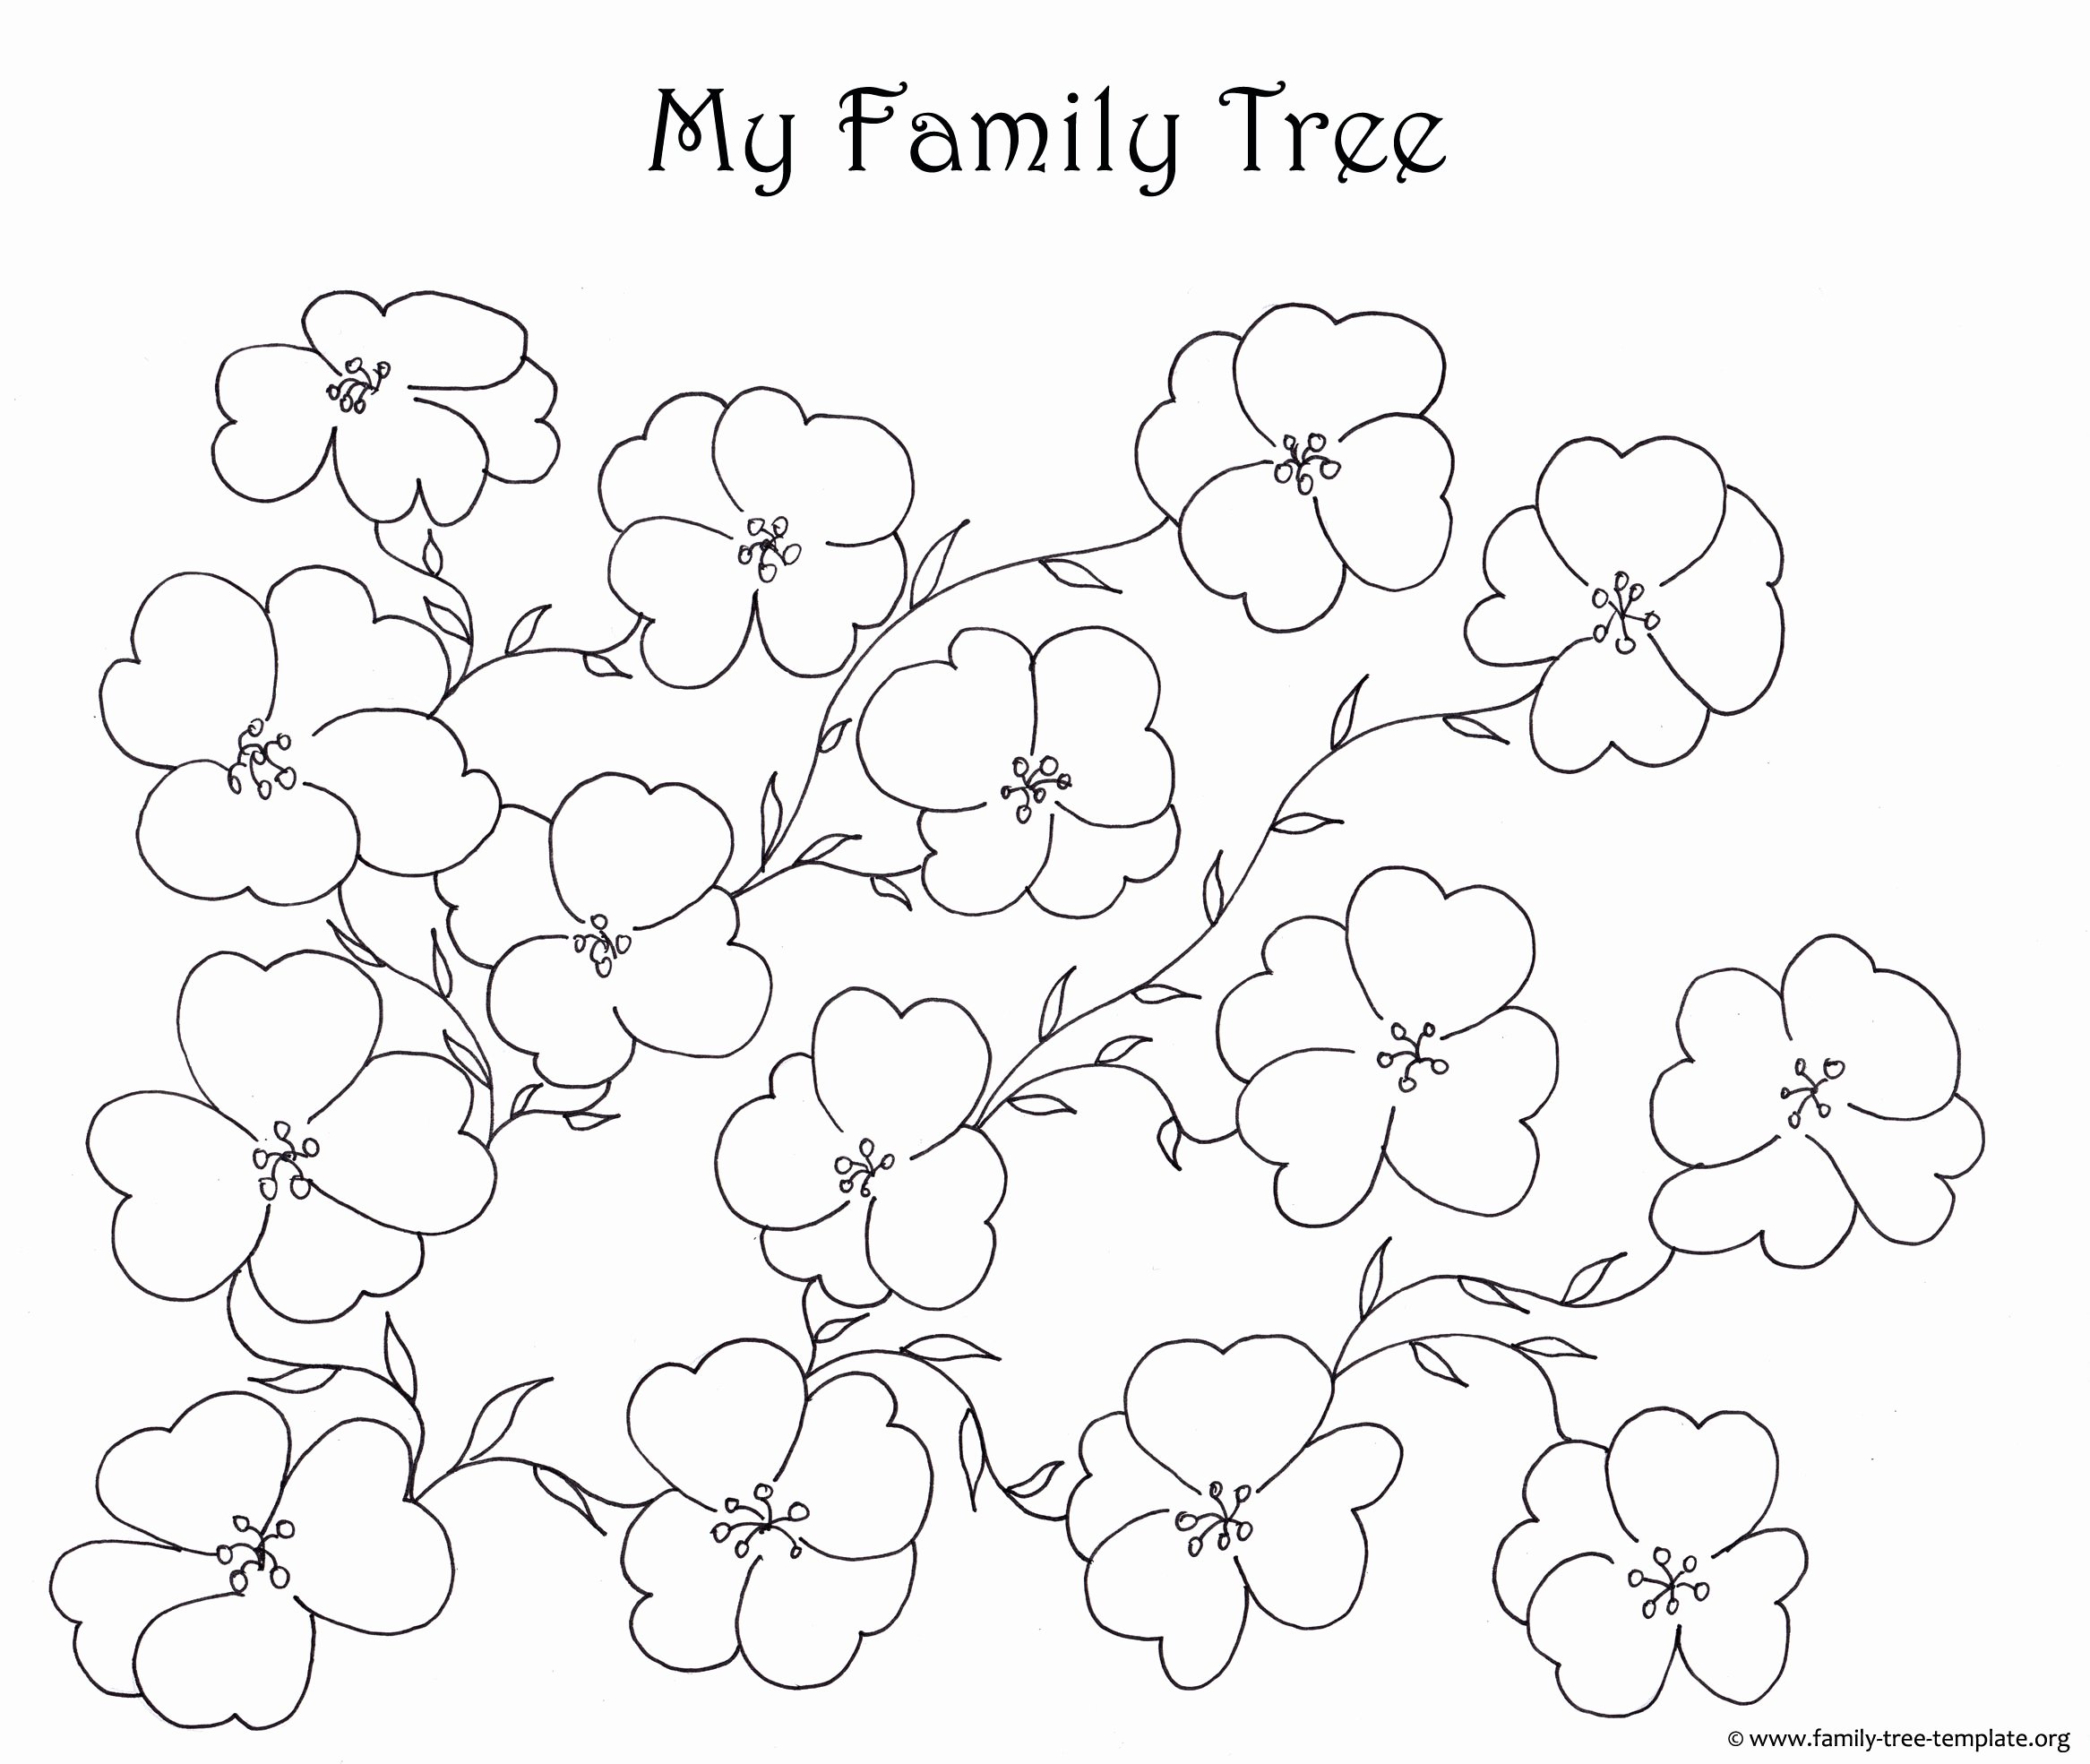 Printable Blank Family Tree Unique Make A Family Tree Easily with these Free Ancestry Charts